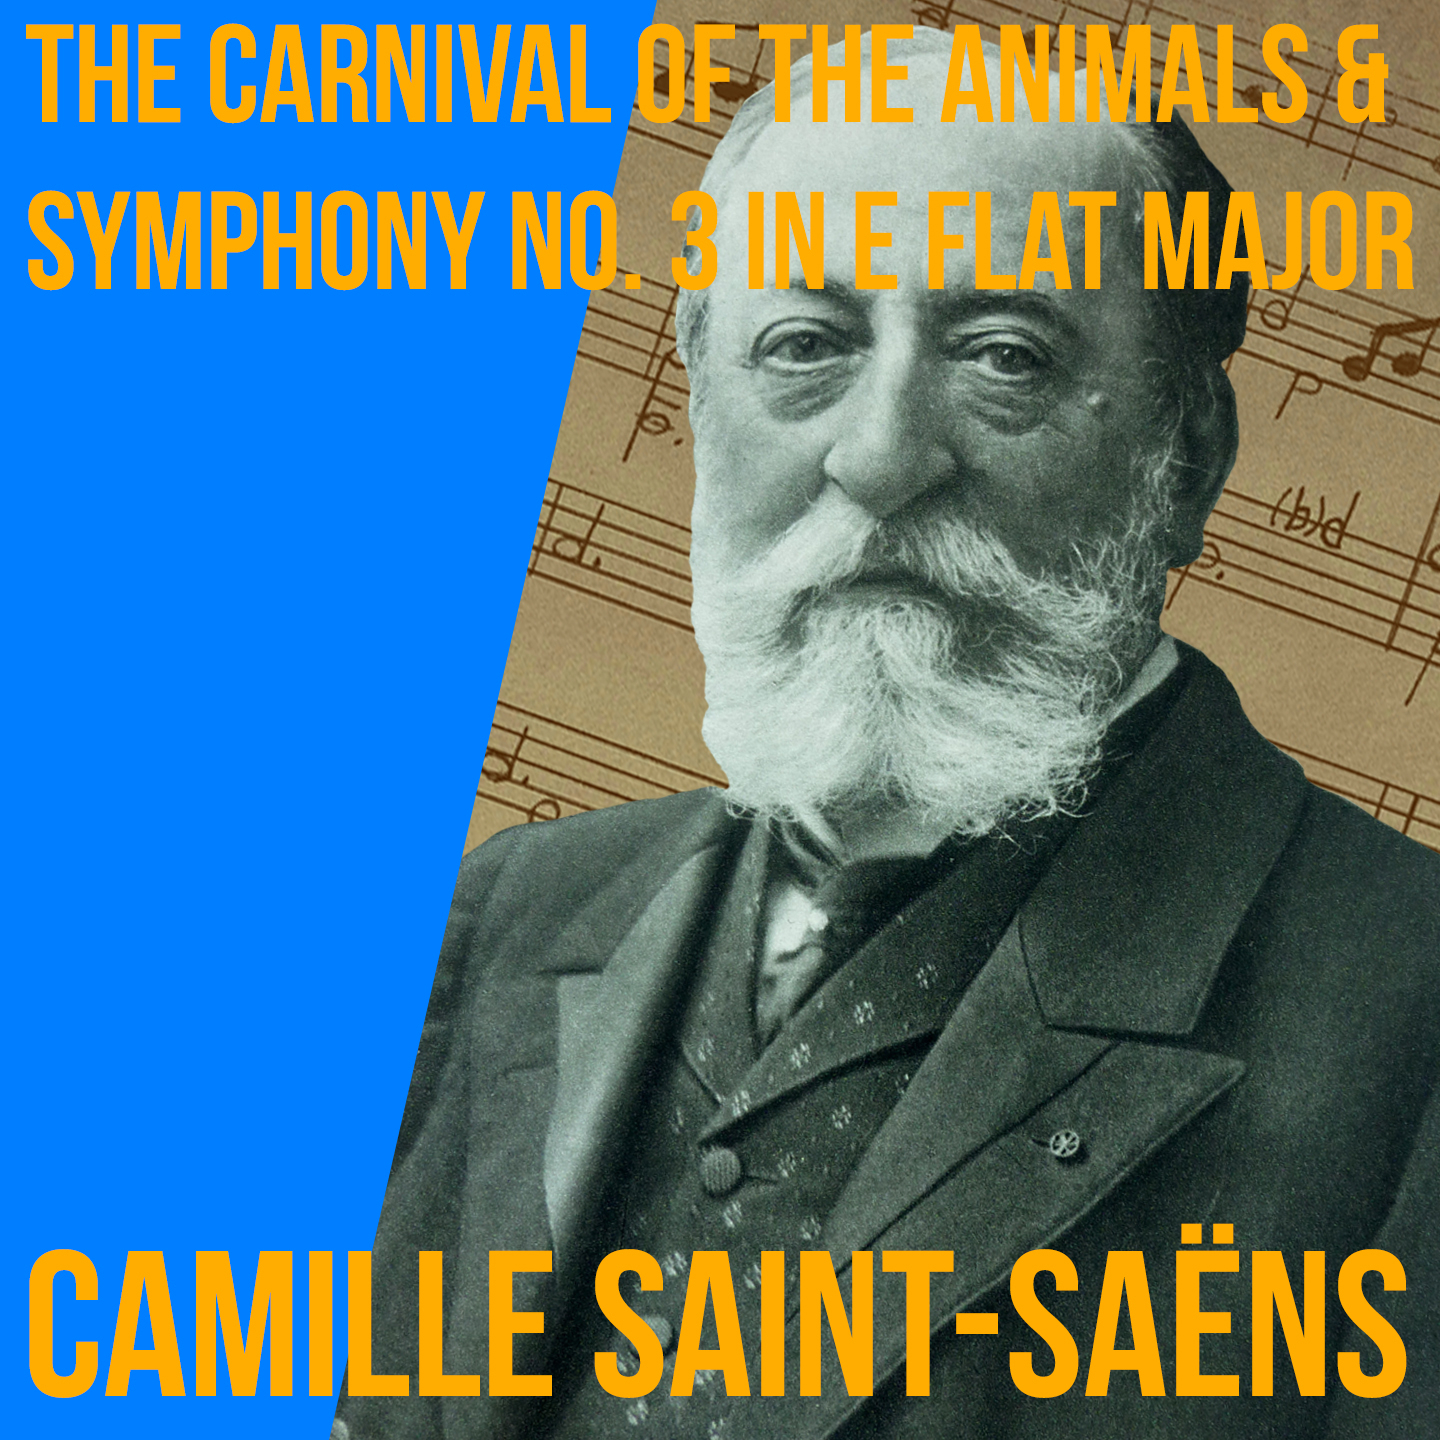 The Carnival Of The Animals & Symphony No. 3 in E Flat Major